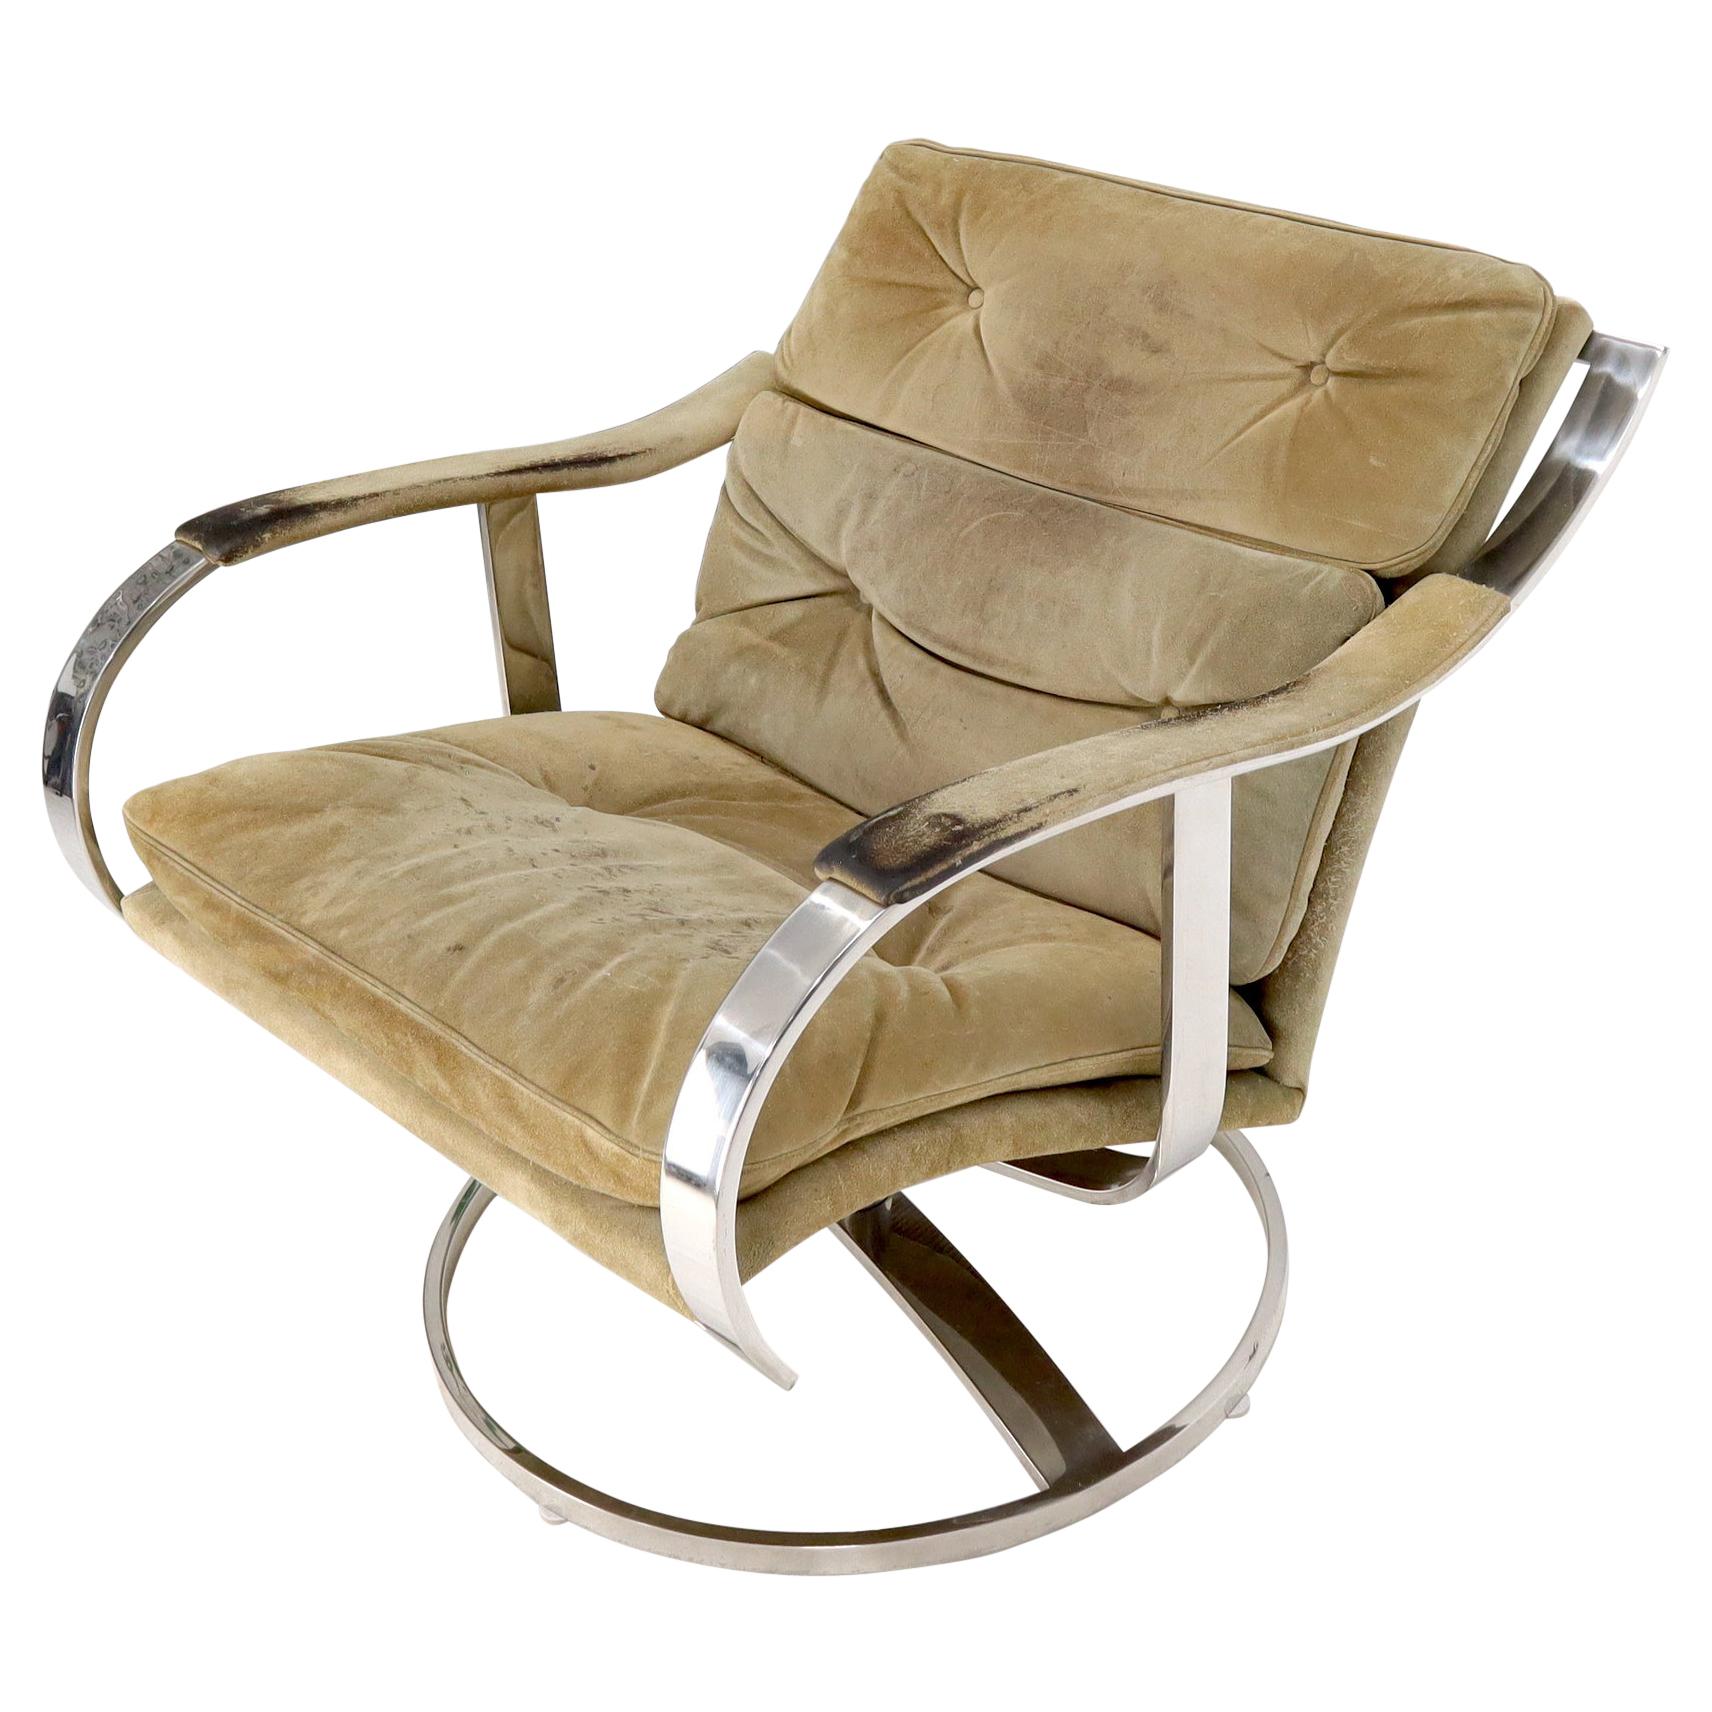 Heavy Gage Polished Stainless Steel Swivel Base Suede Upholstery Lounge Chair